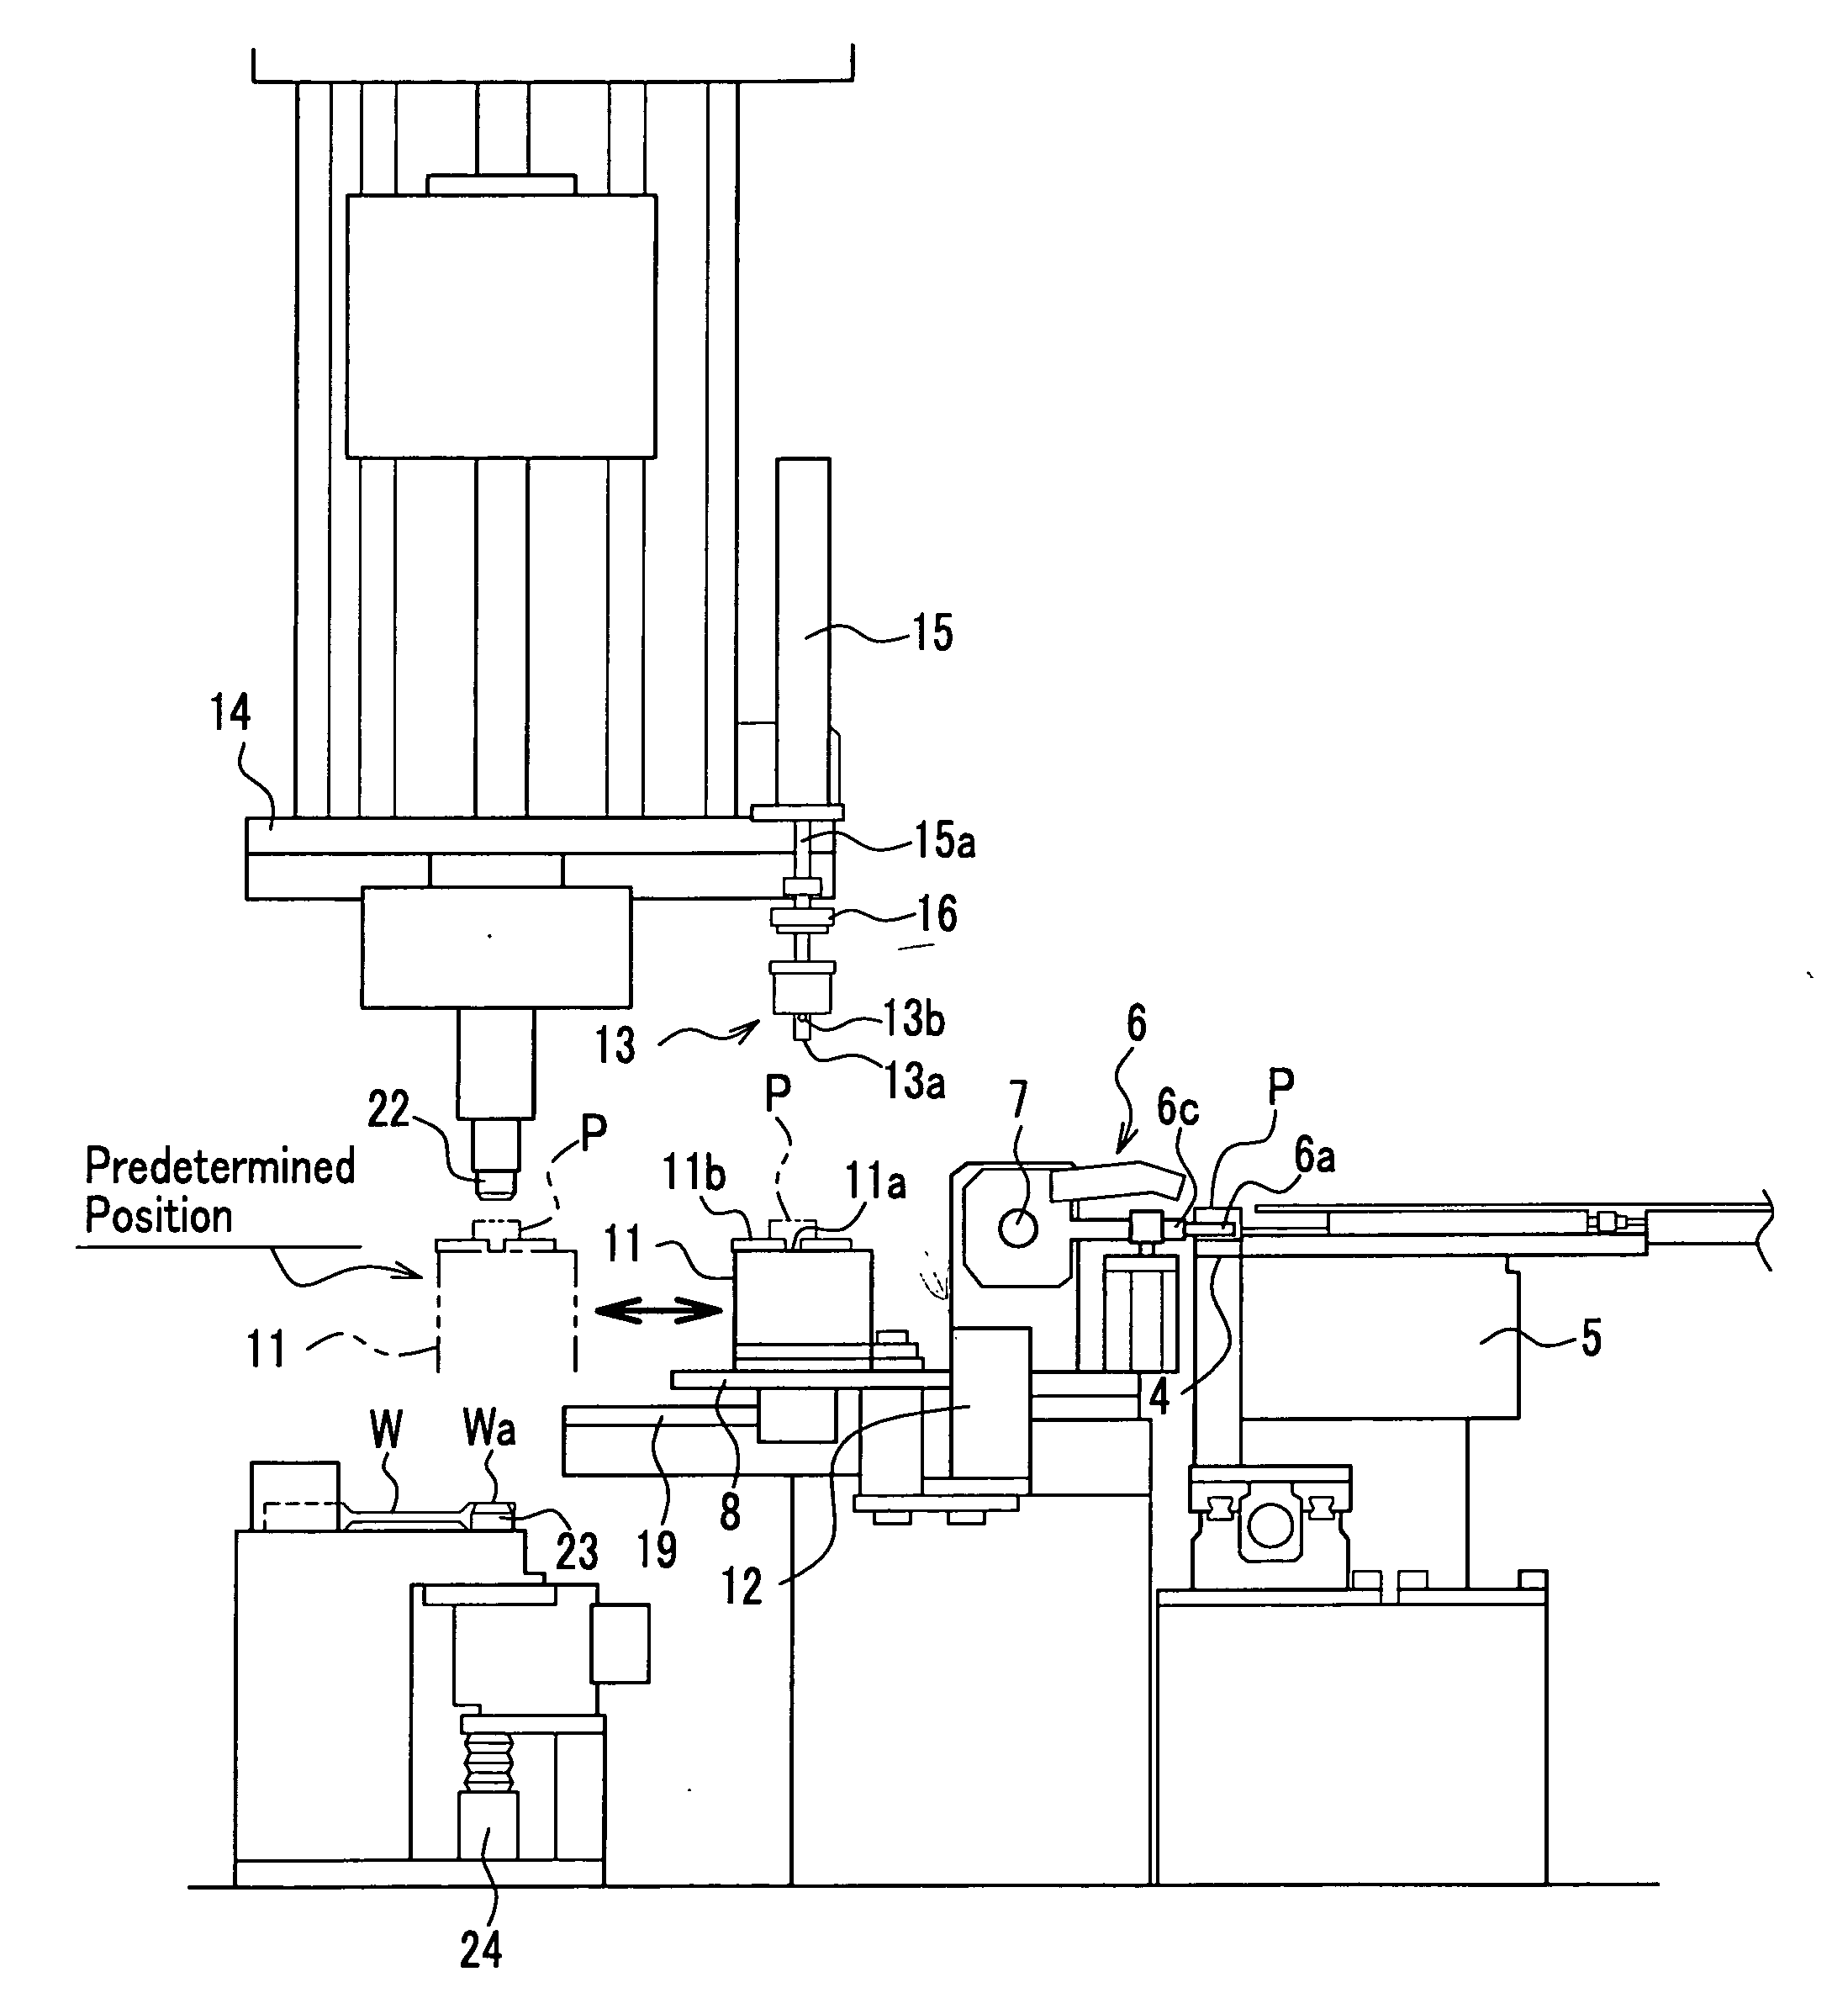 Apparatus for supplying and press-fitting part to work